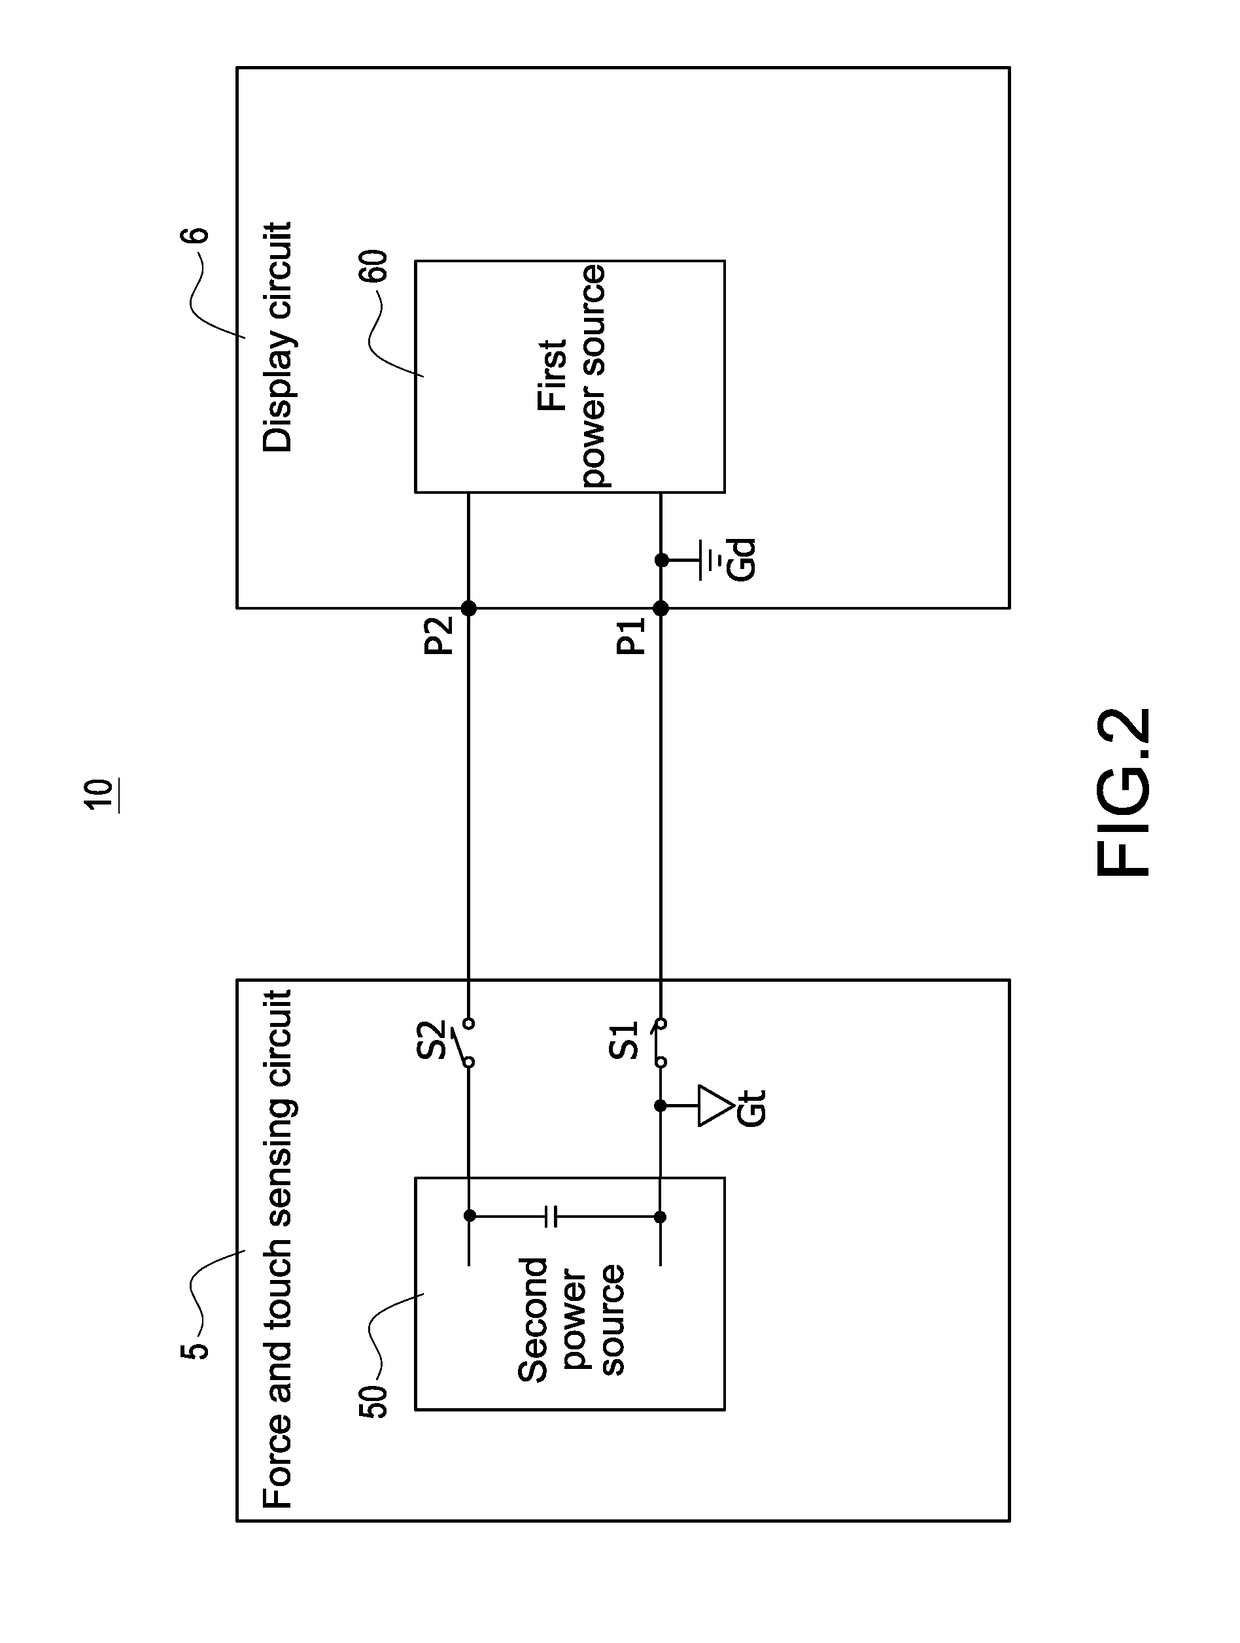 Electronic apparatus with independent power sources